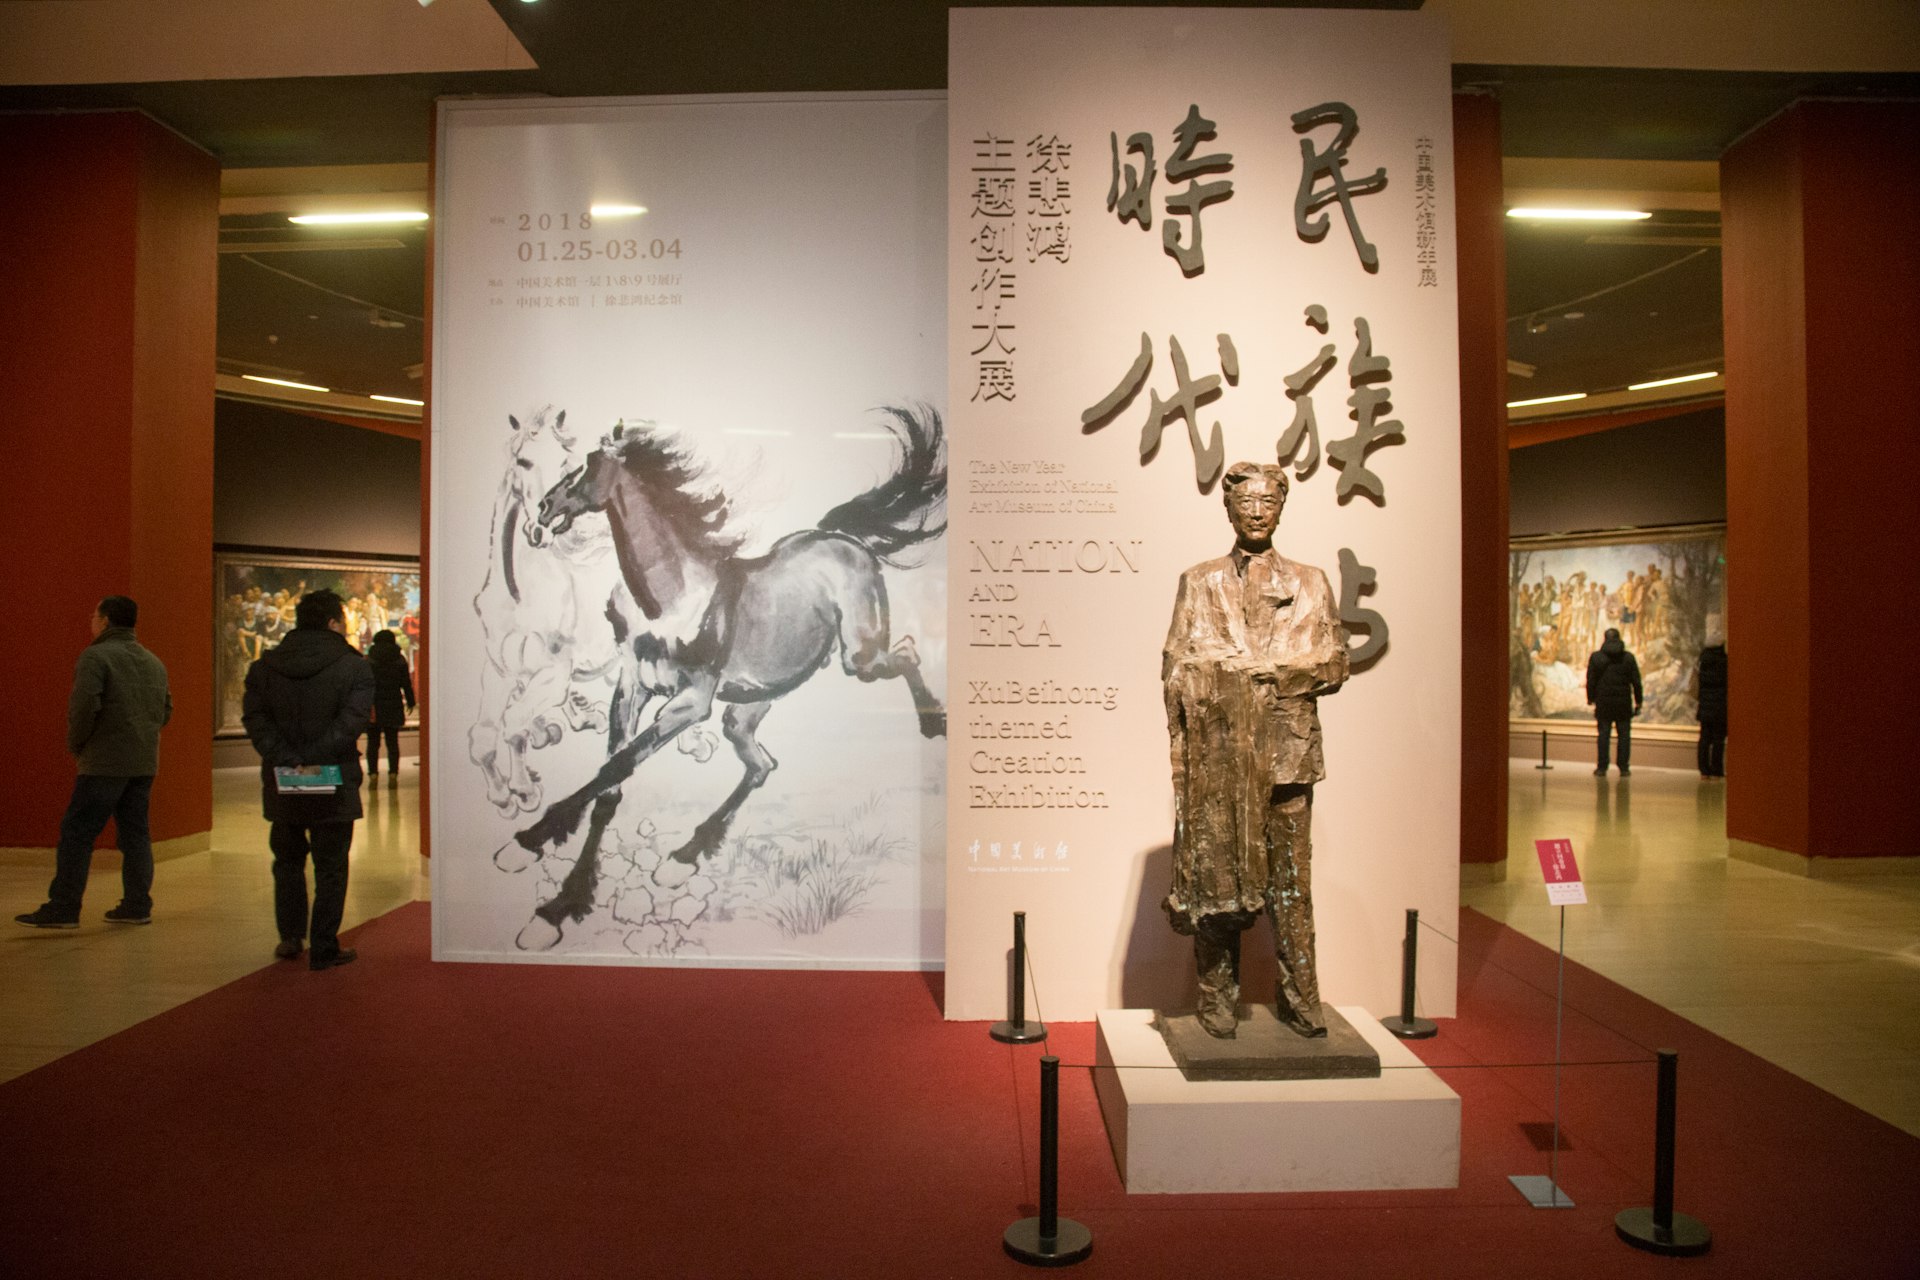 Exhibits at the National Art Museum of China, Beijing, China